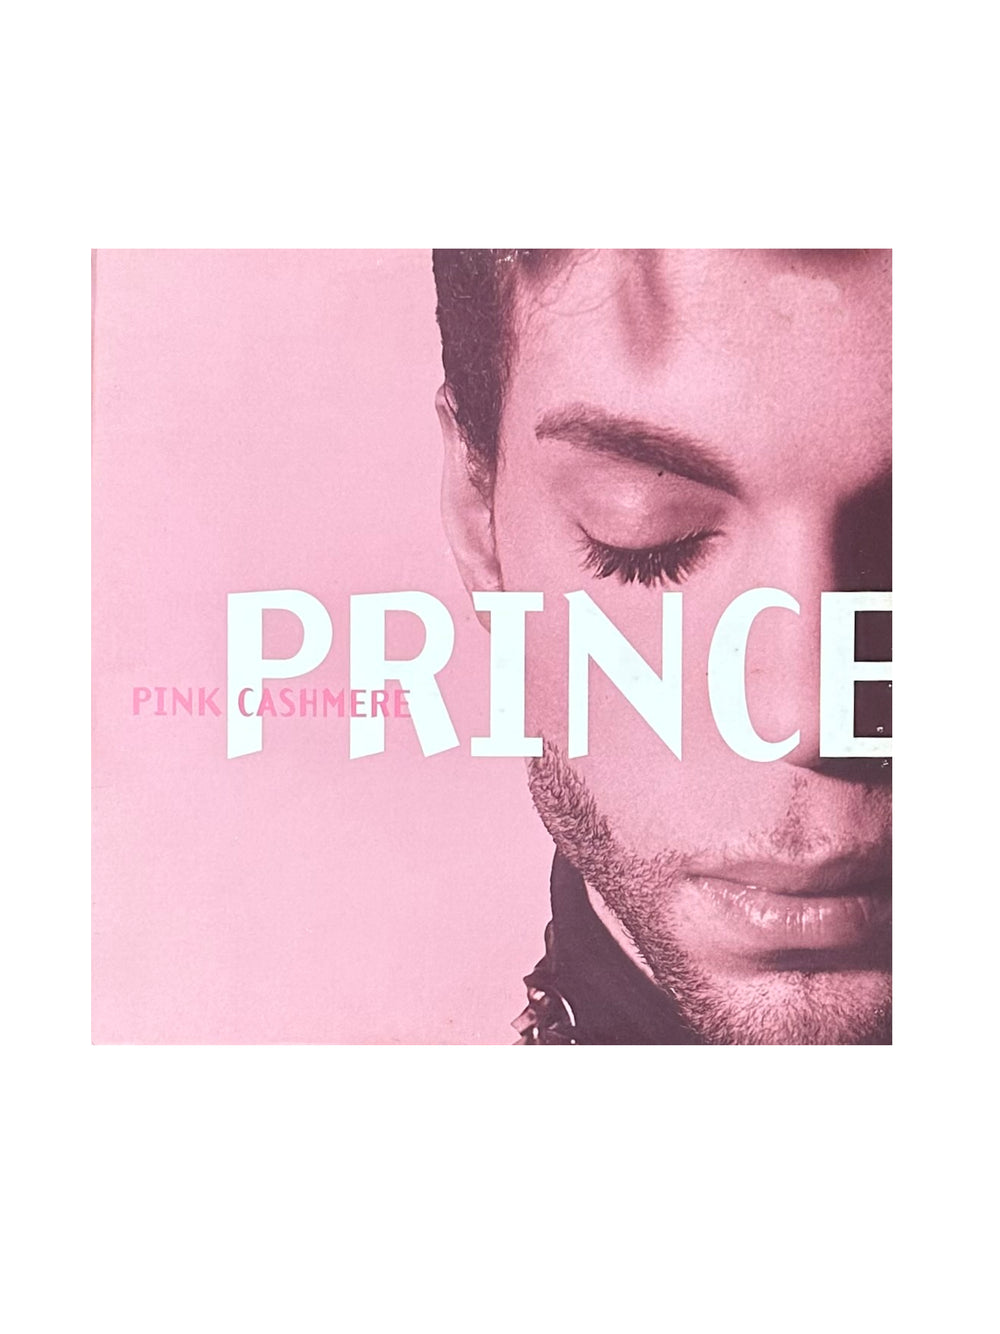 Prince – Pink Cashmere 12 Inch Vinyl Single US Promotional Very Rare Preloved:1993